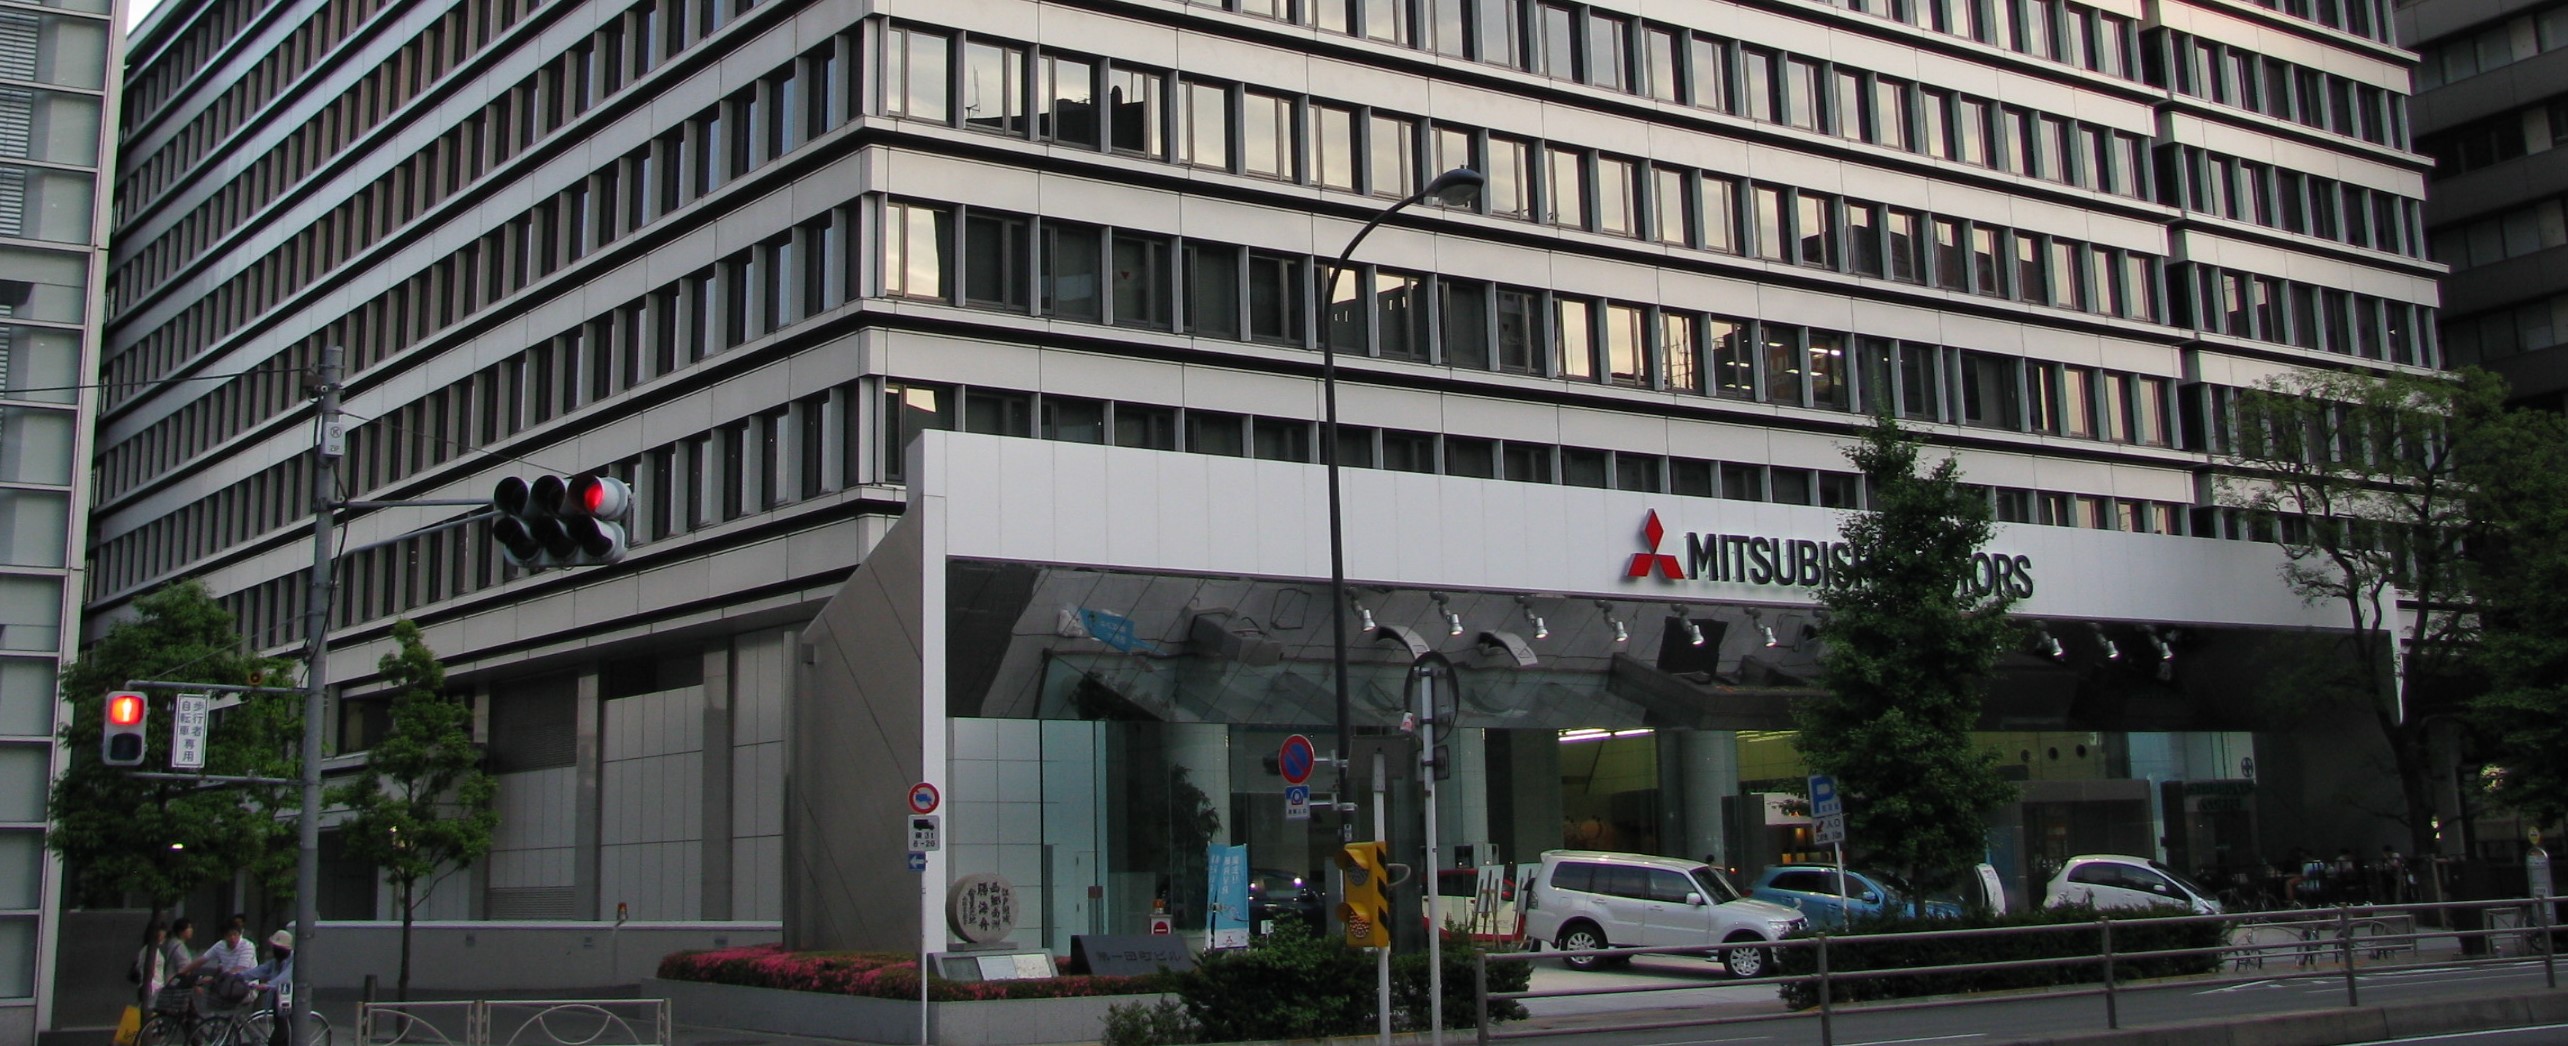 South Korea court orders seizure of Mitsubishi Heavy assets over wartime labor